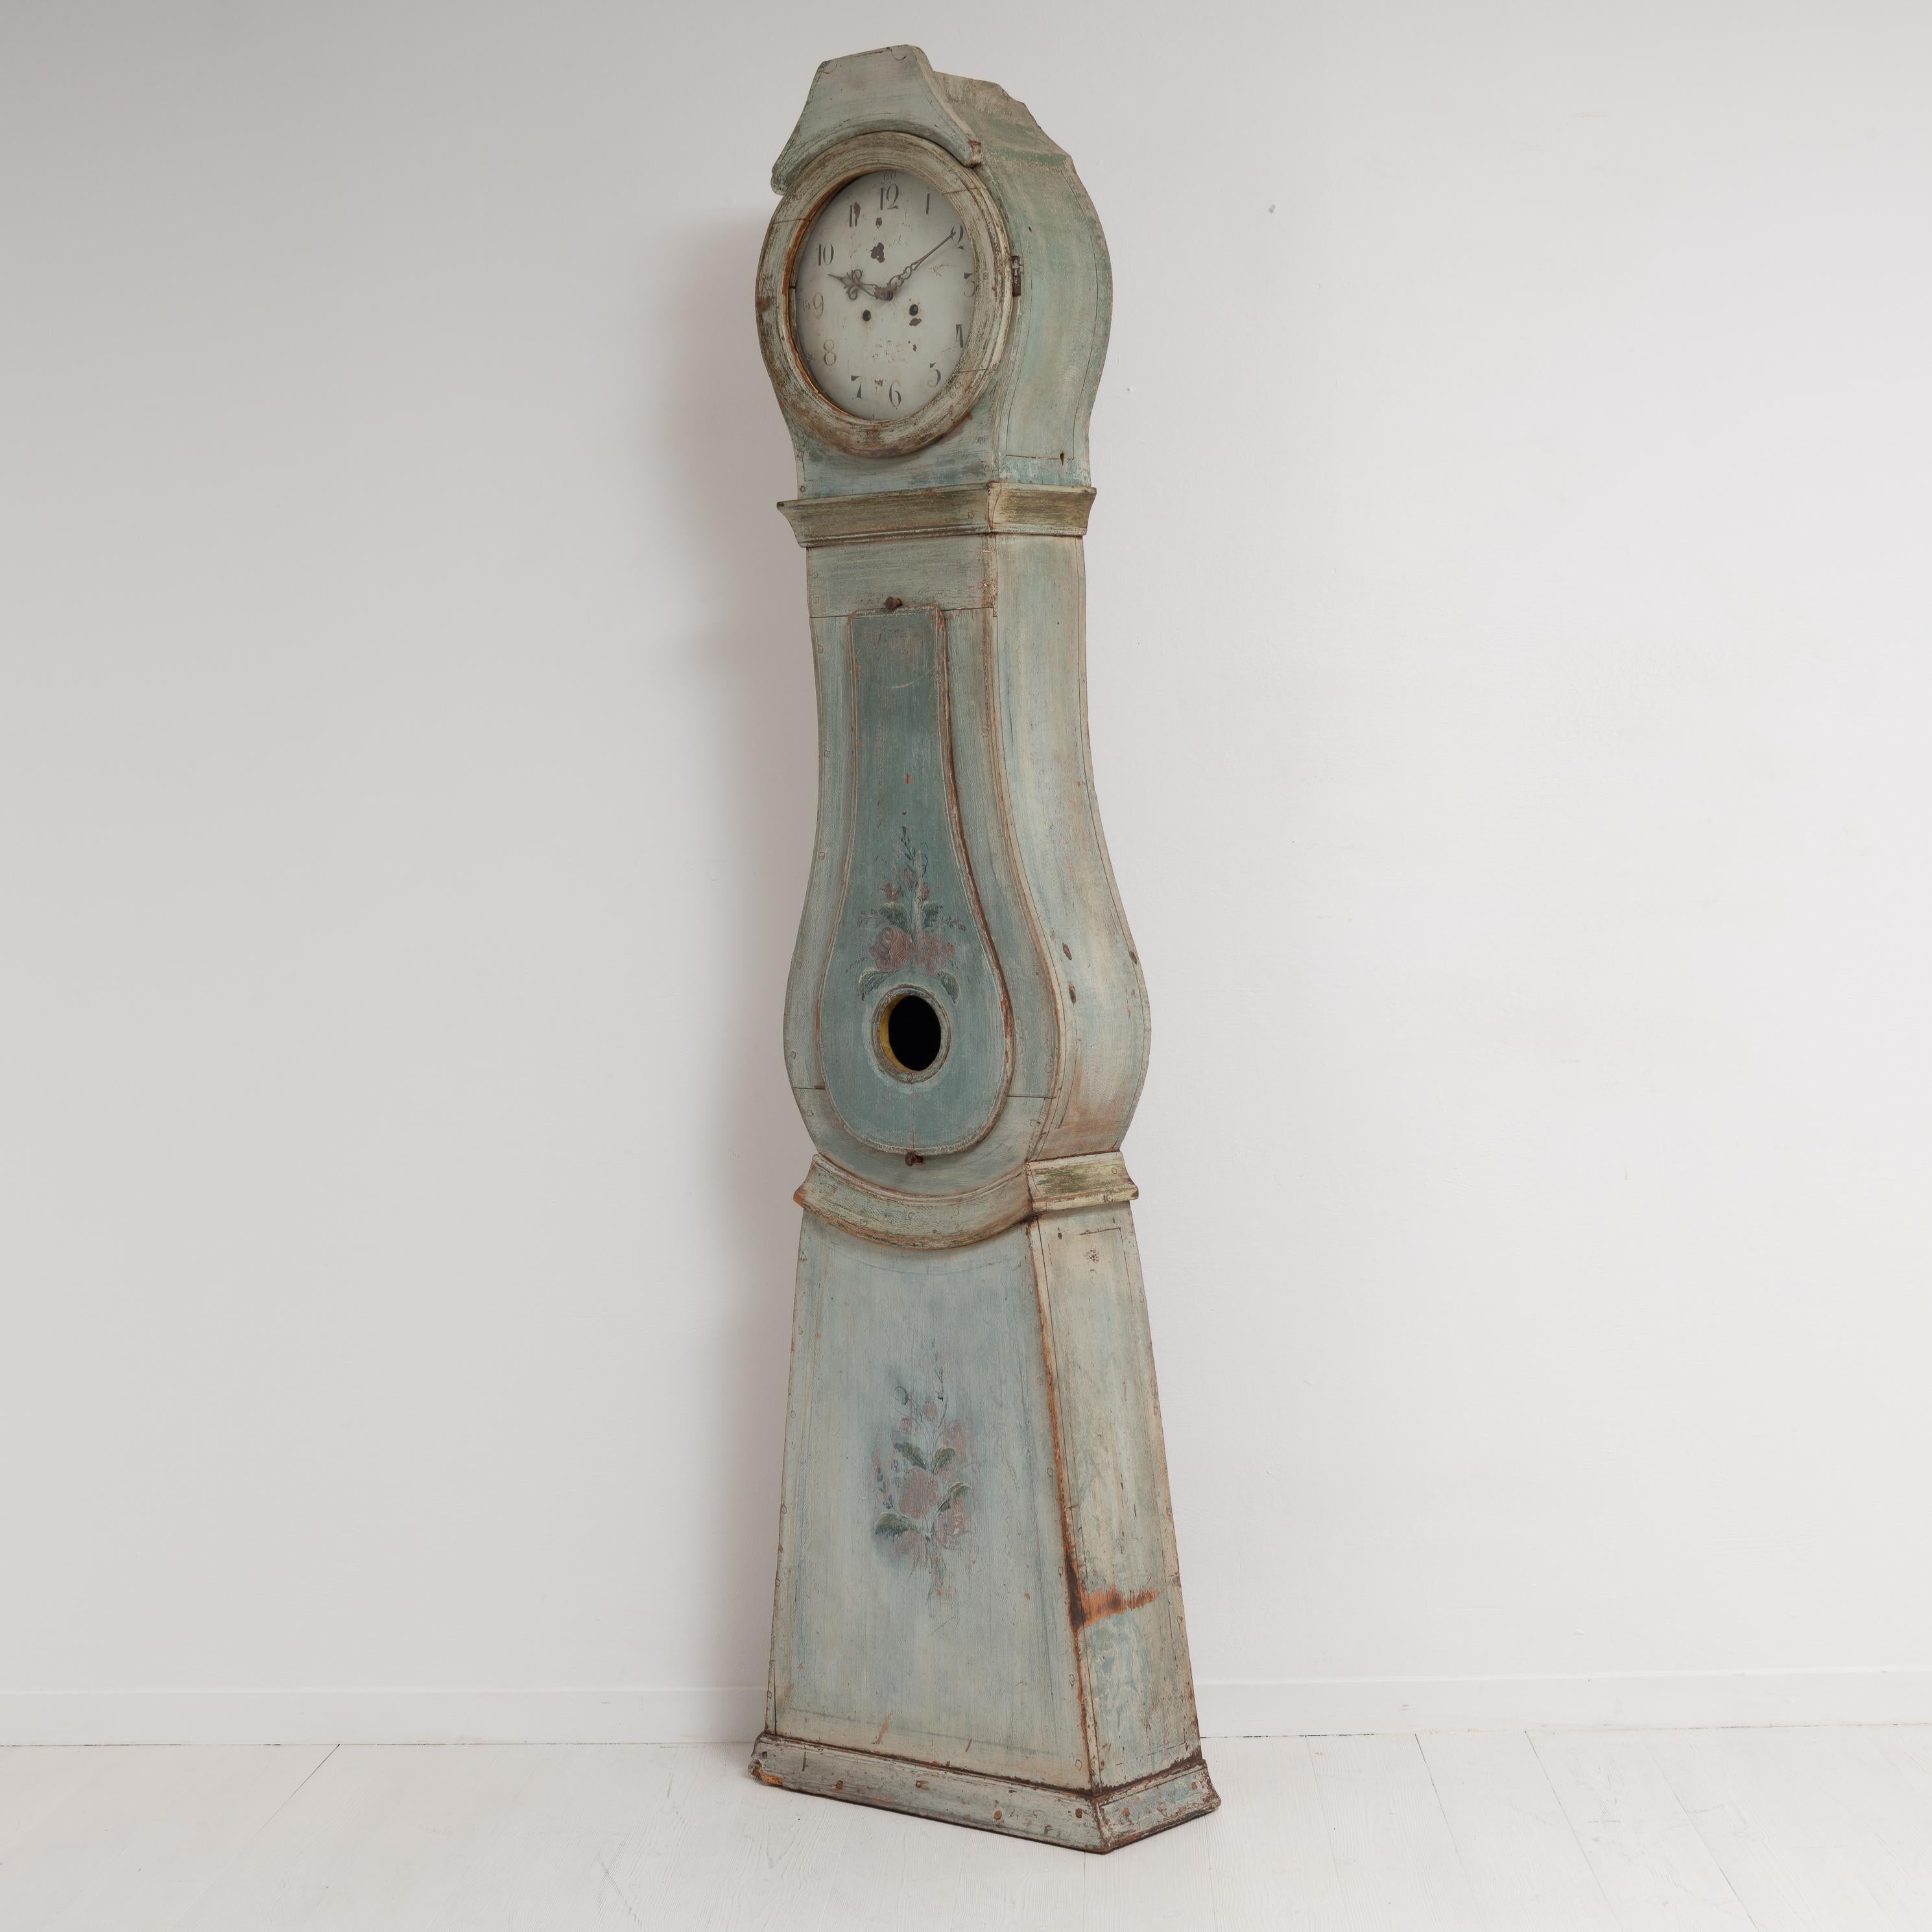 Hand-Crafted Early 19th Century Swedish Rococo Long Case Clock